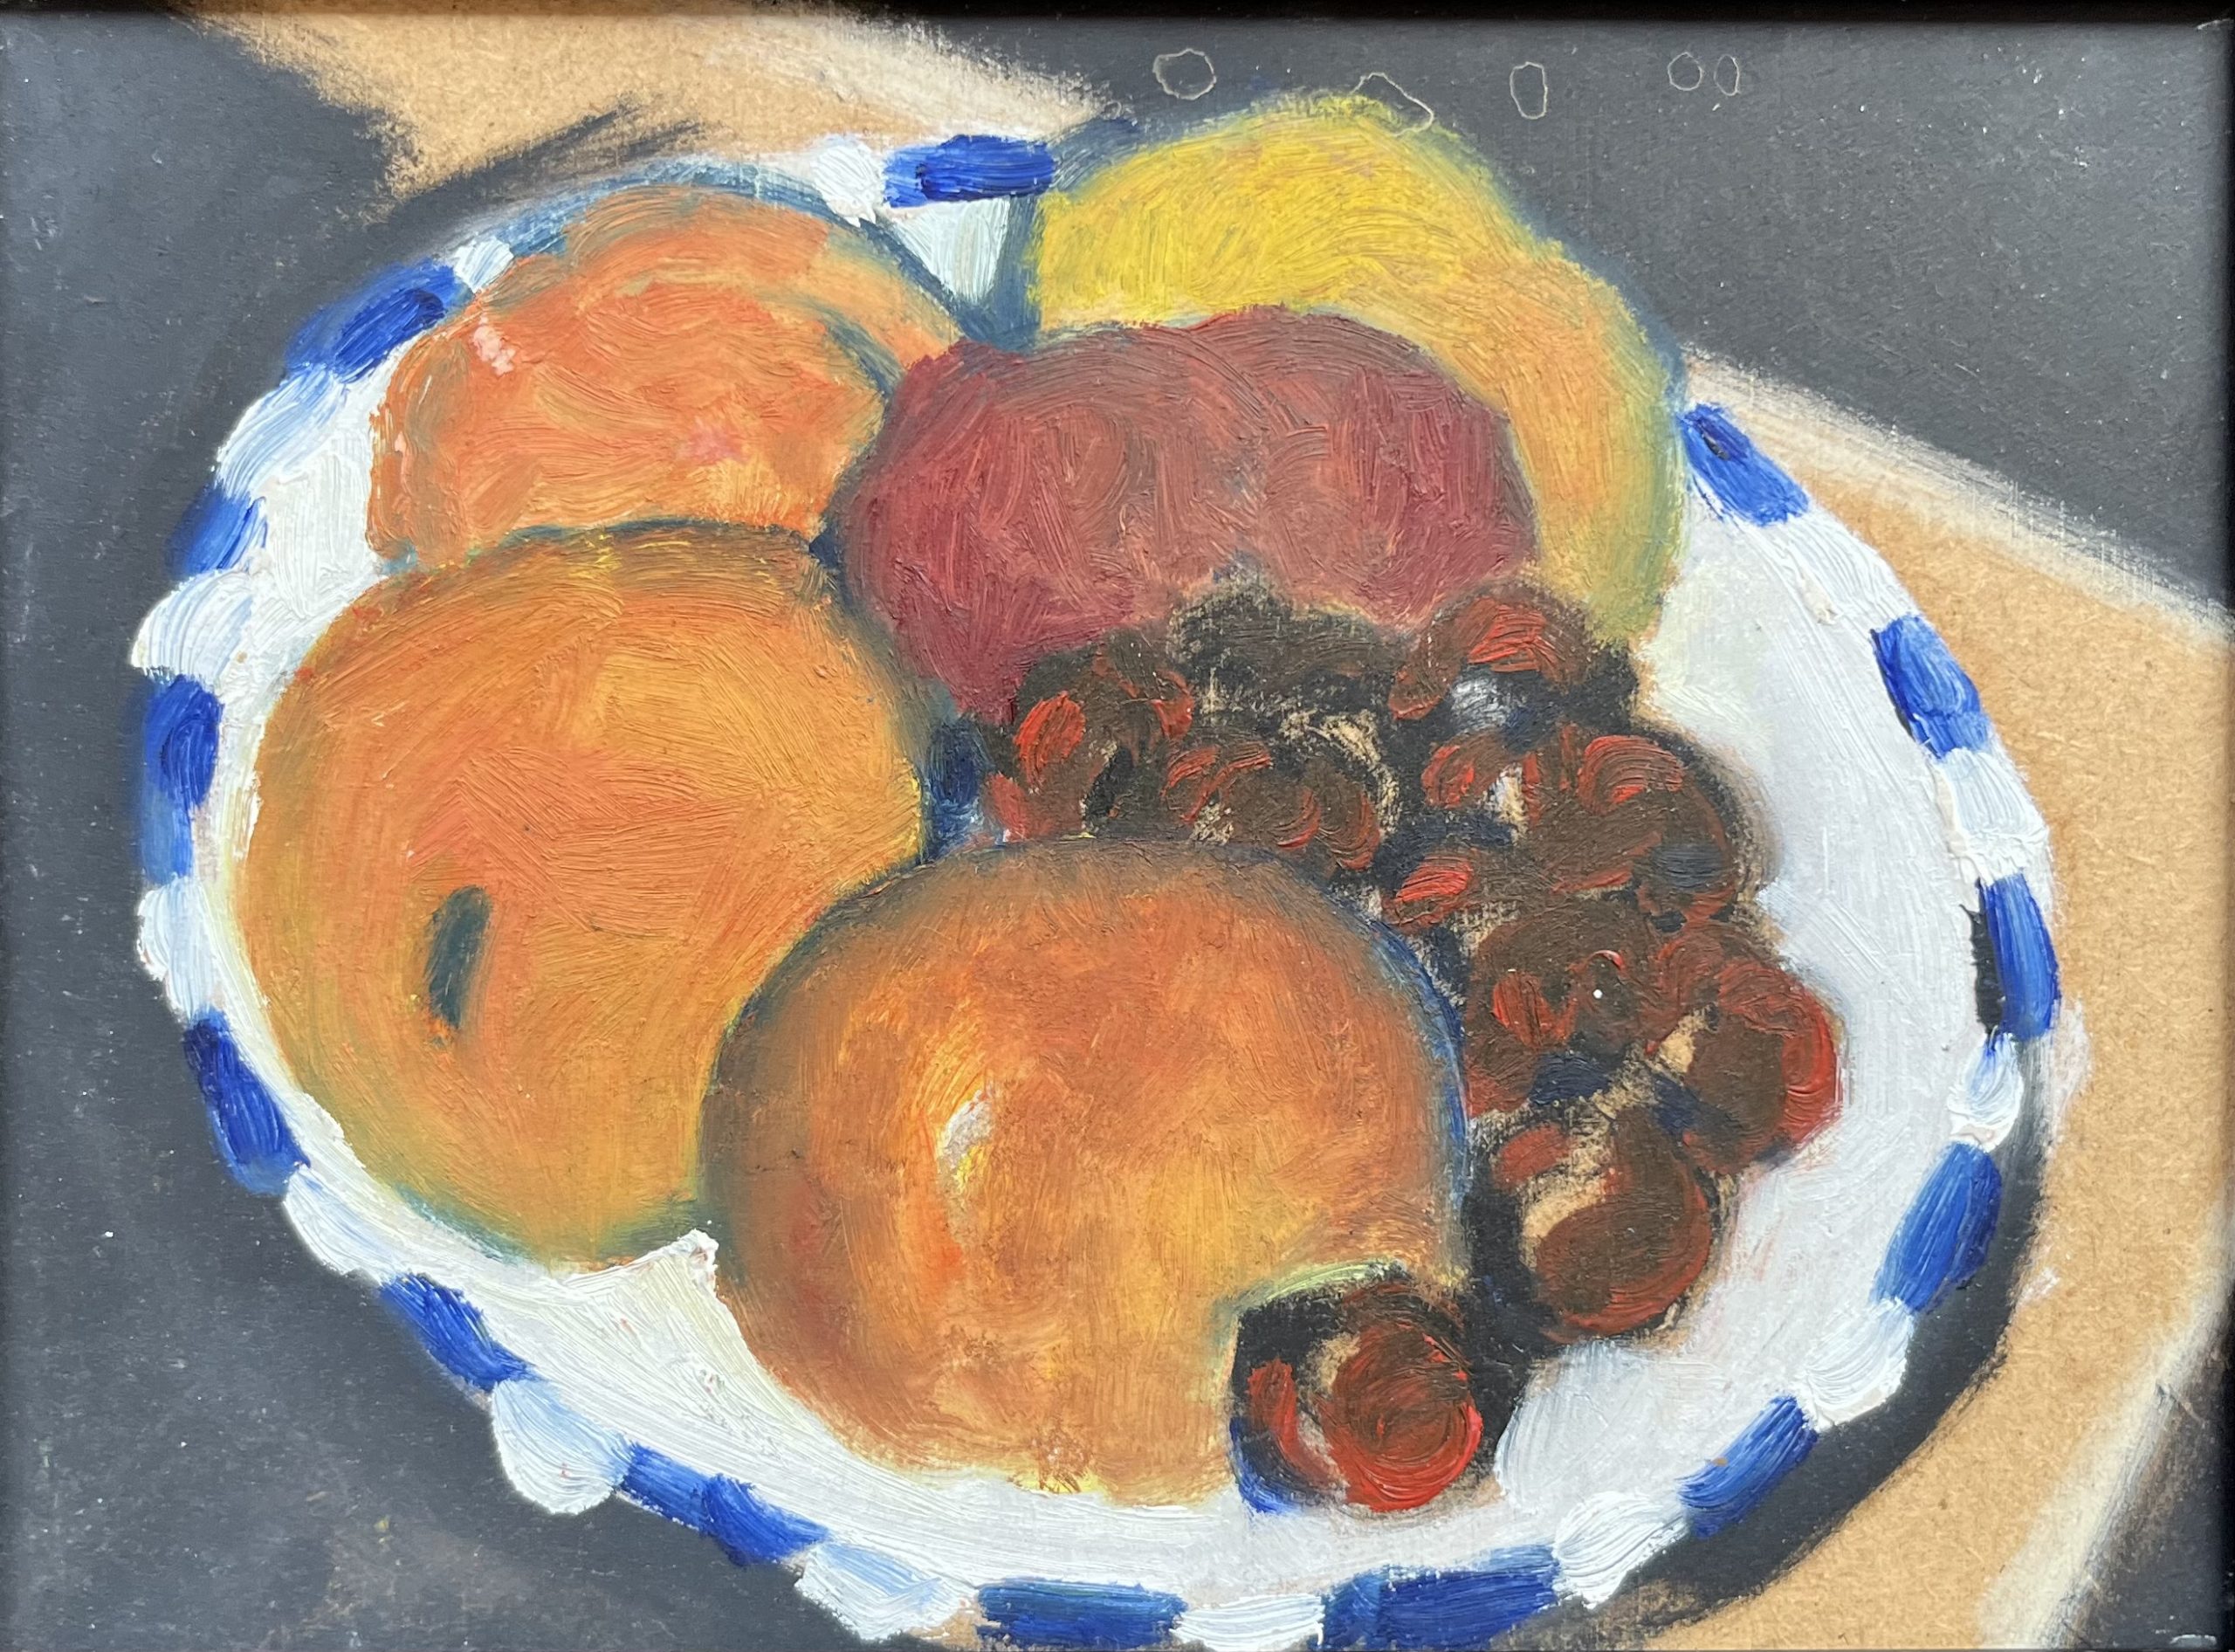 Michael Howard - Still Life on White an Blue Plate - oil/acrylic on board, size: 15x20cm £375